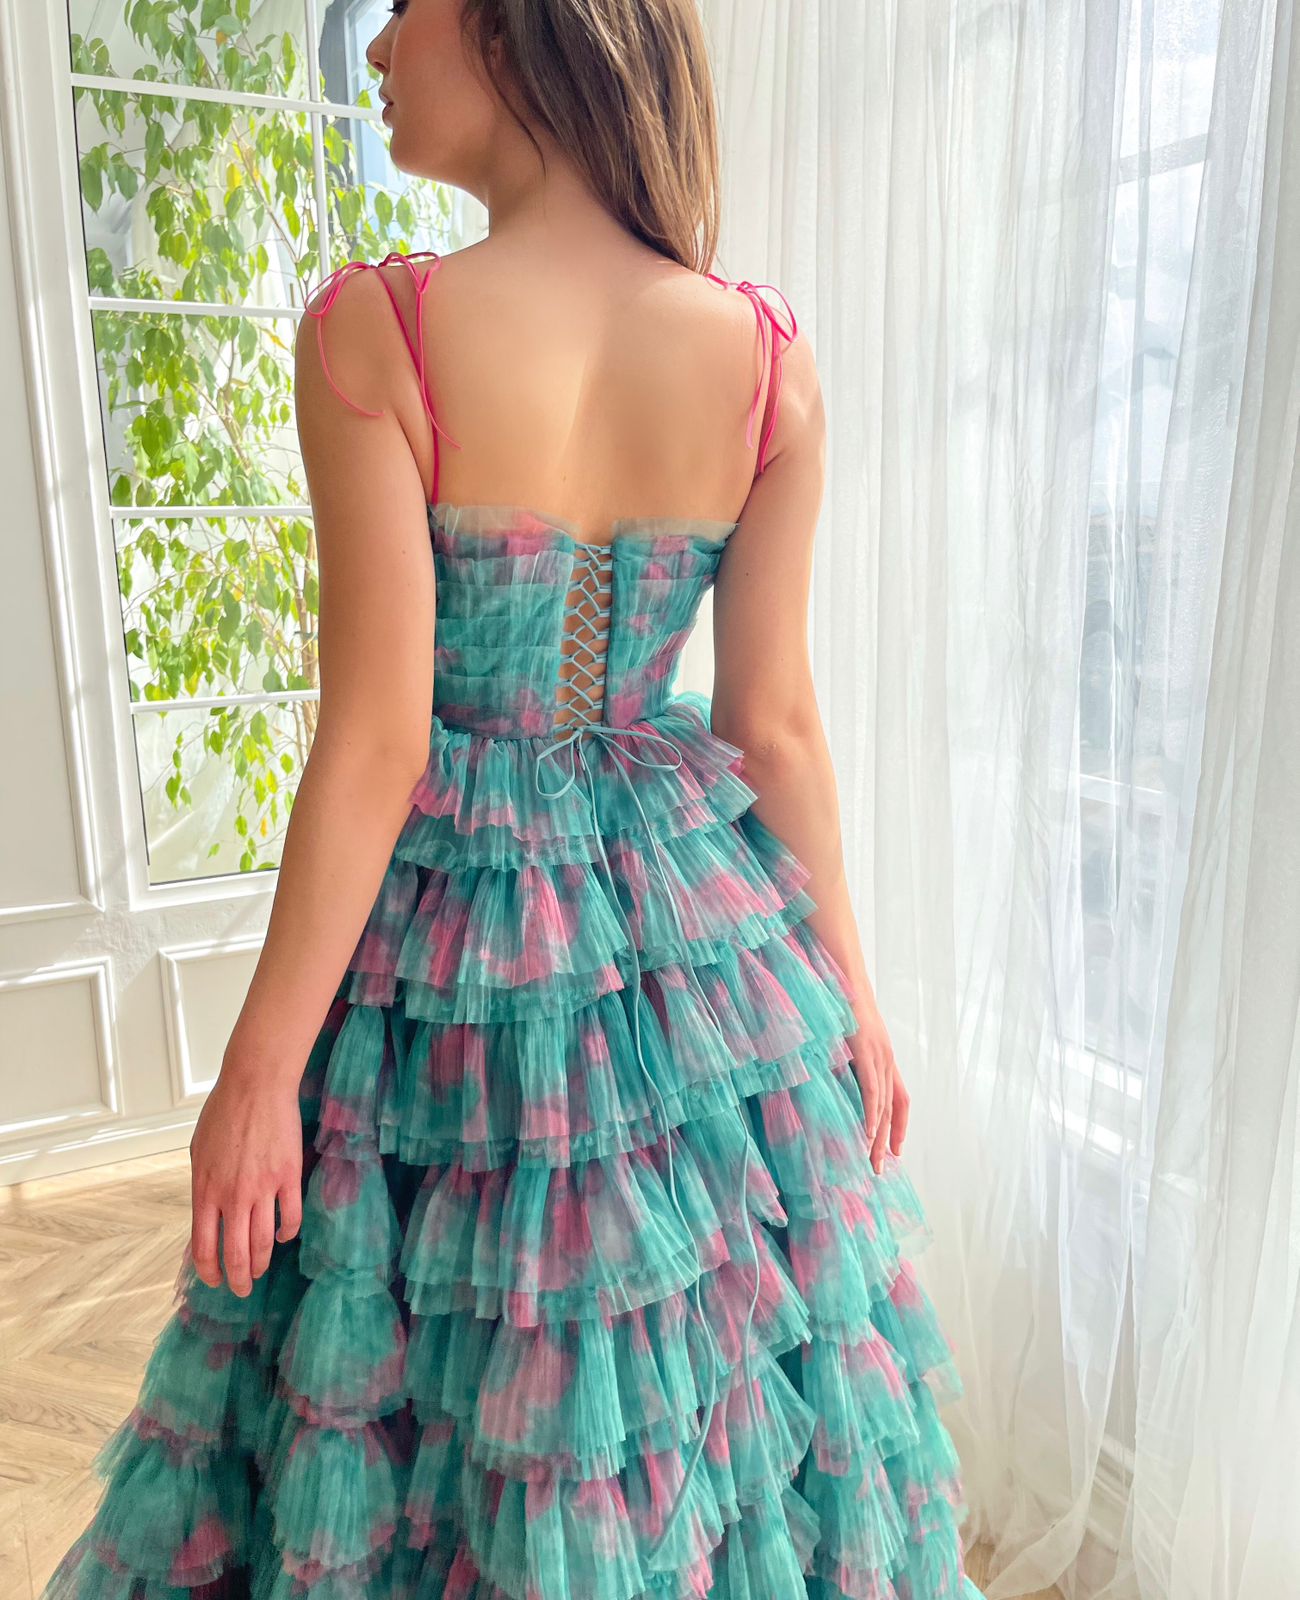 Green A-Line dress with ruffles and spaghetti straps